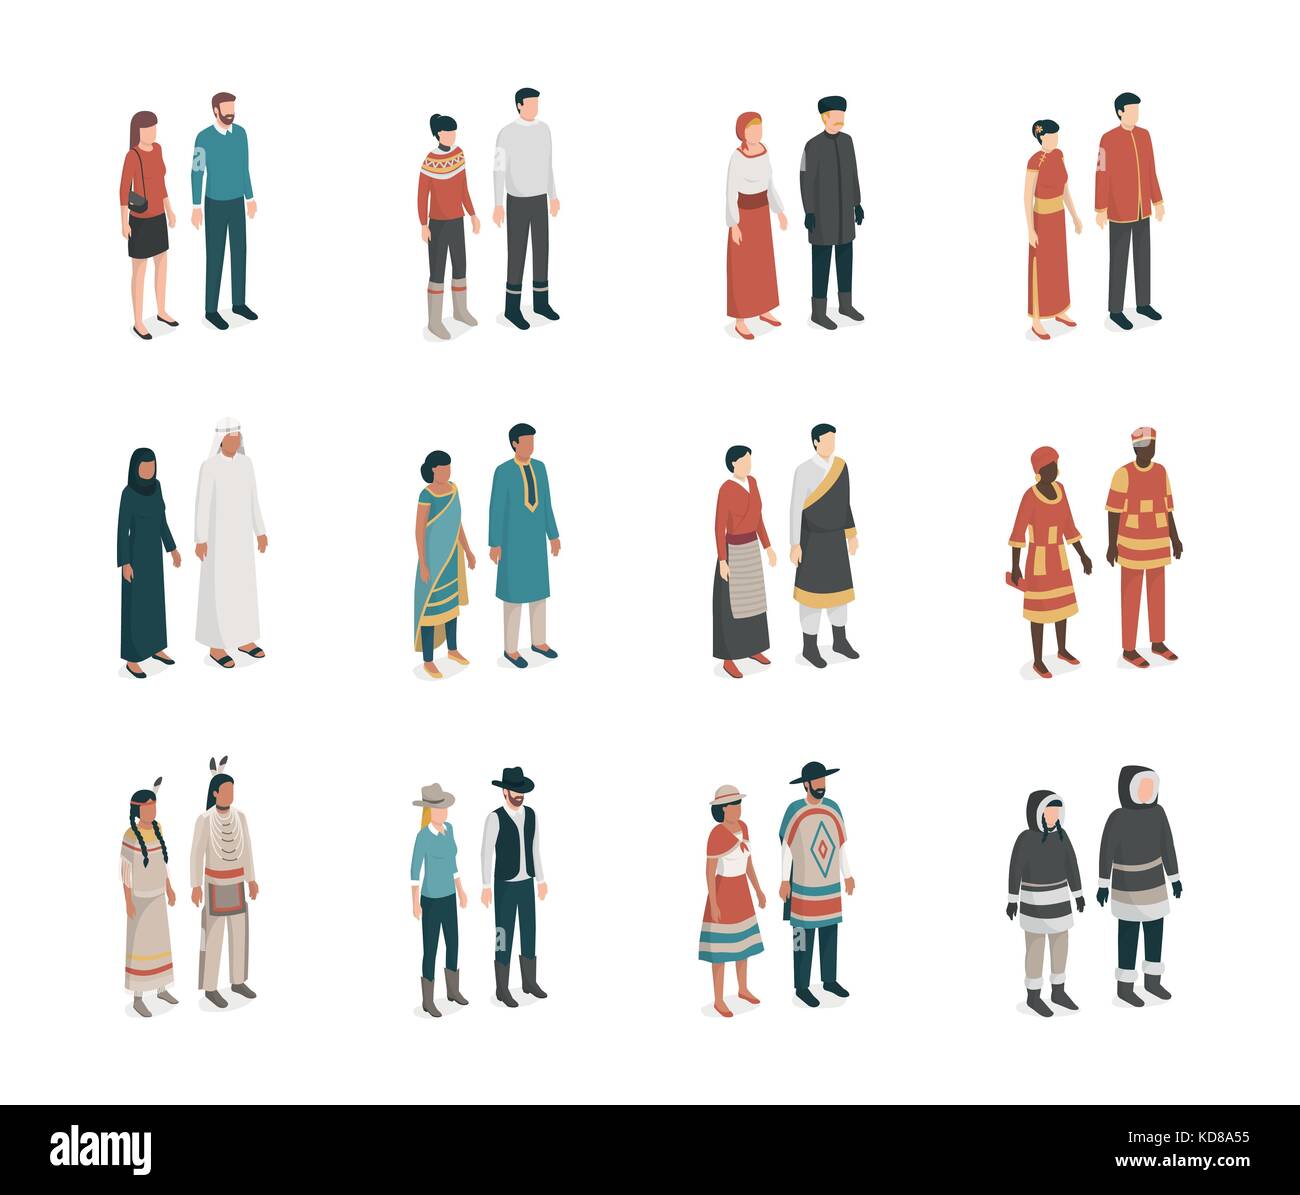 People from all over the world with traditional costumes, community and diversity concept Stock Vector